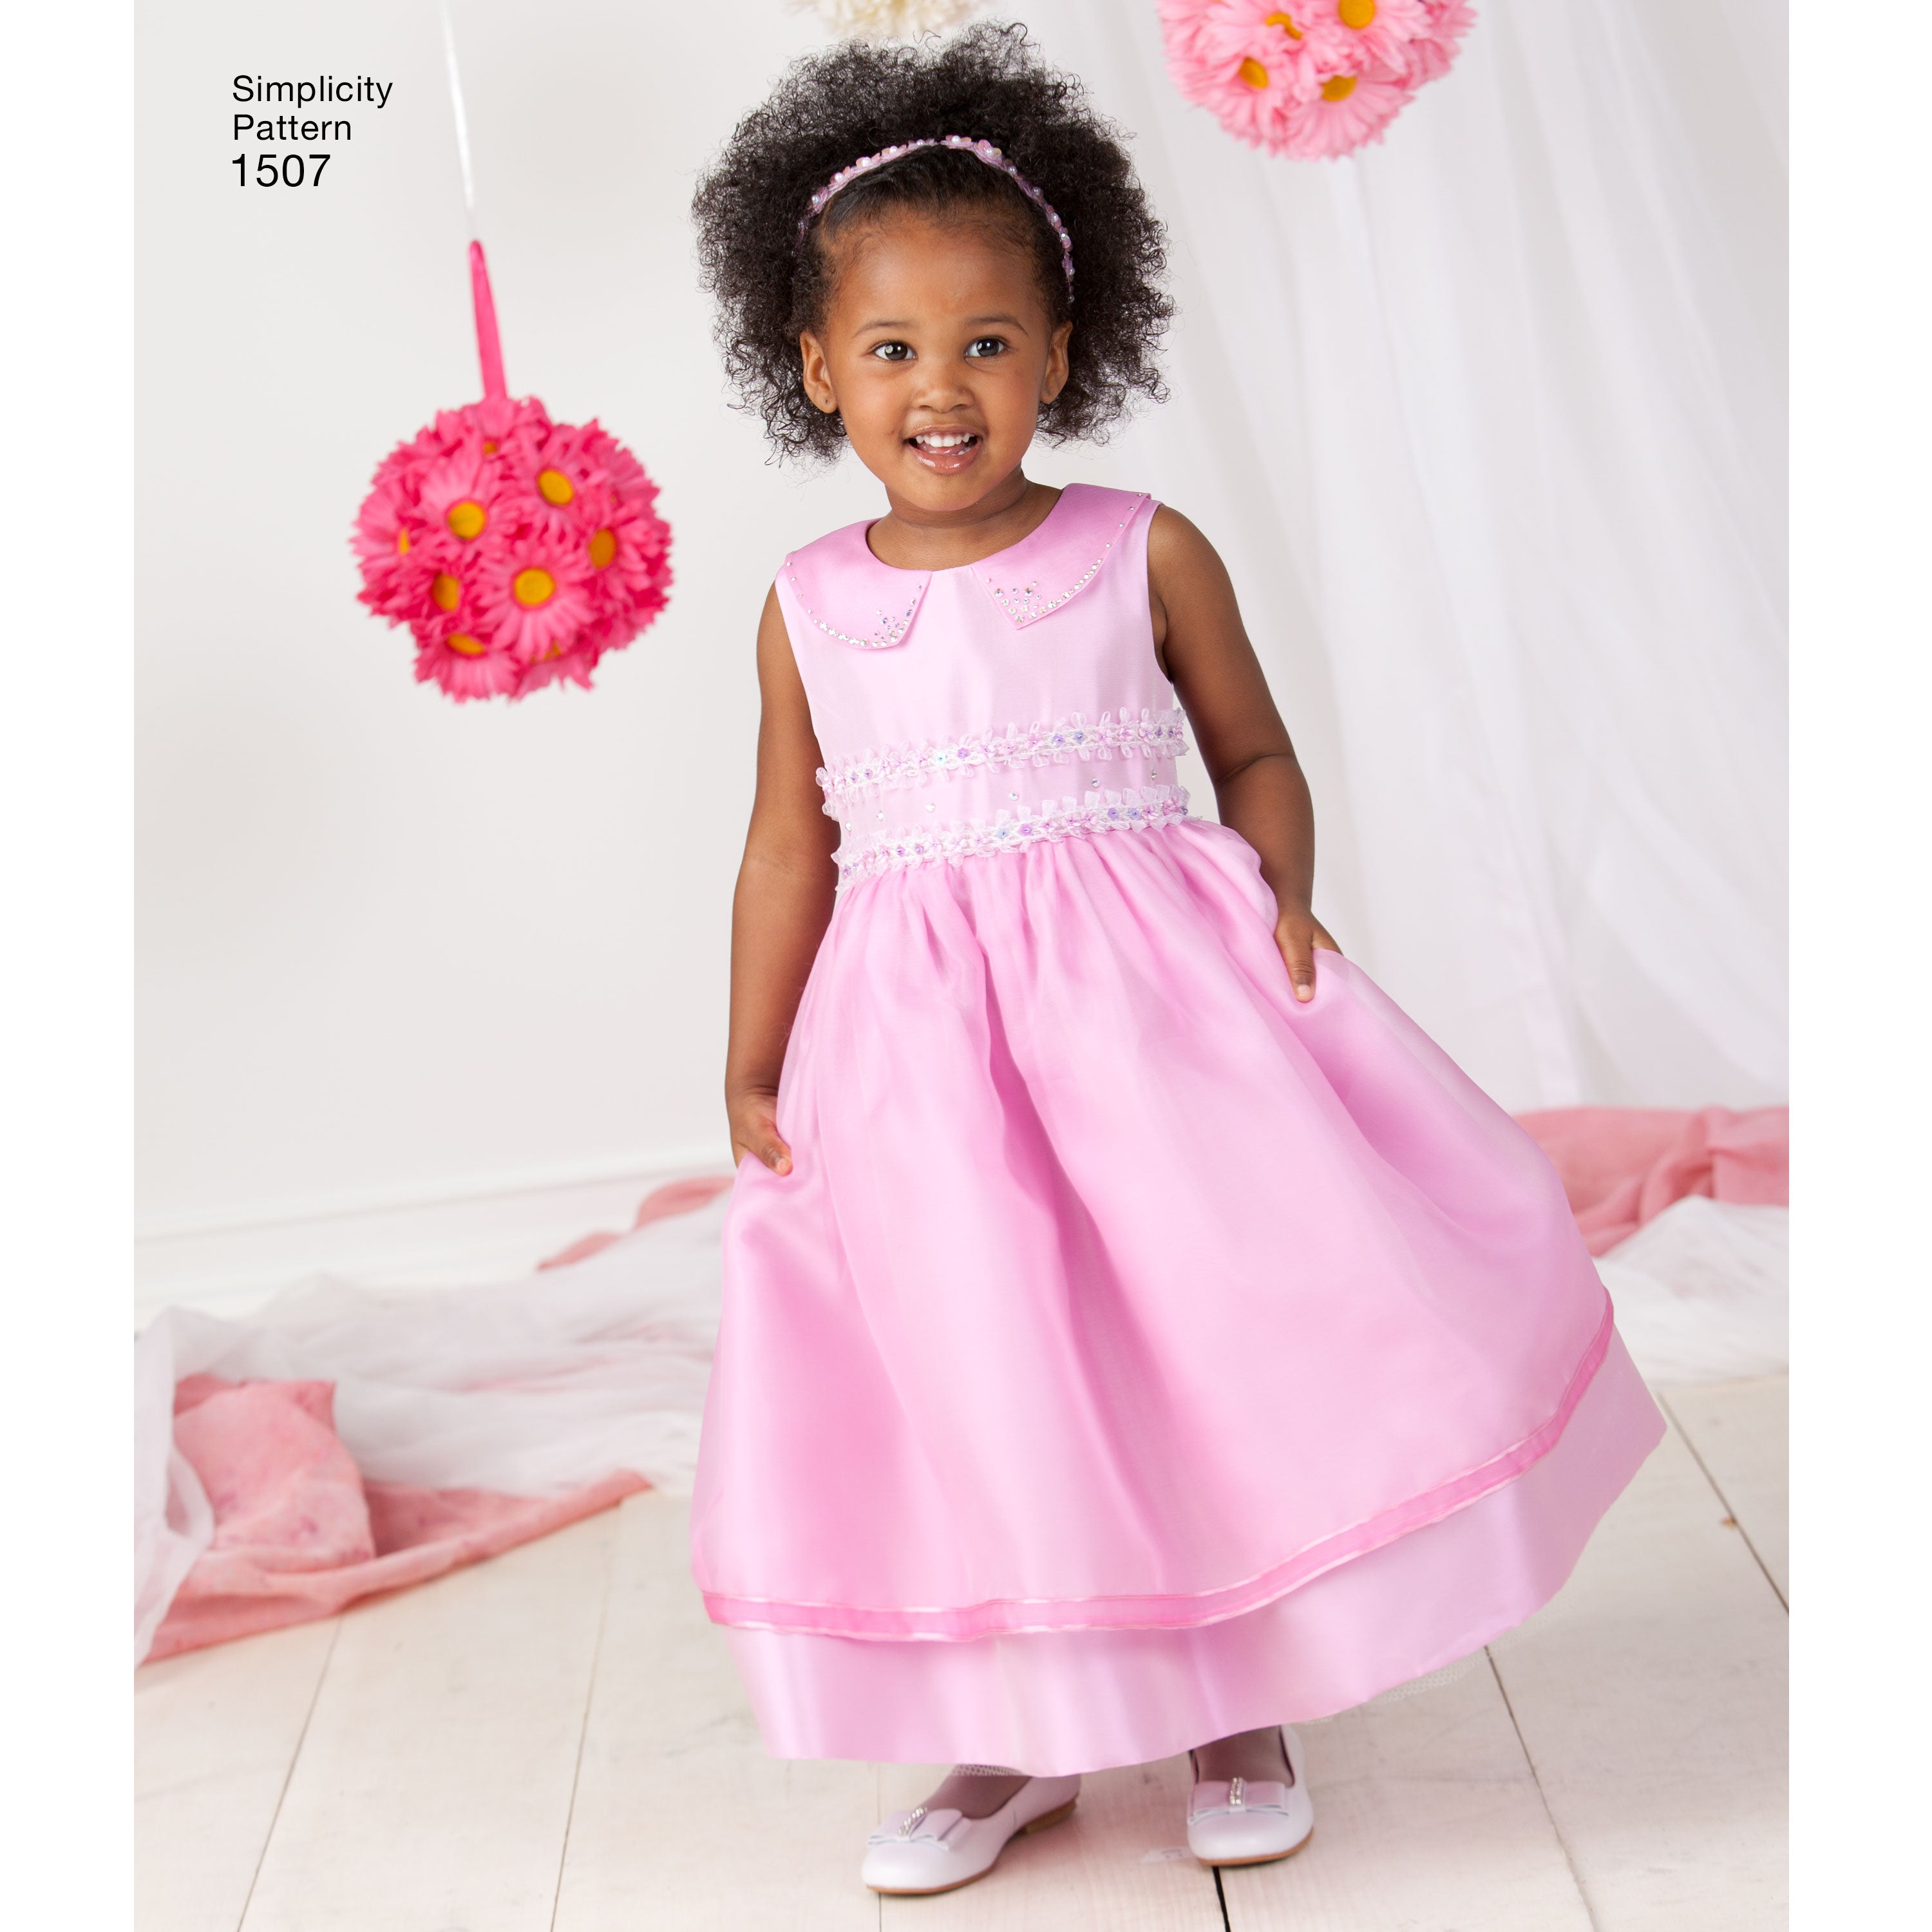 Simplicity Pattern 1507 Toddlers' and Child's dress from Jaycotts Sewing Supplies